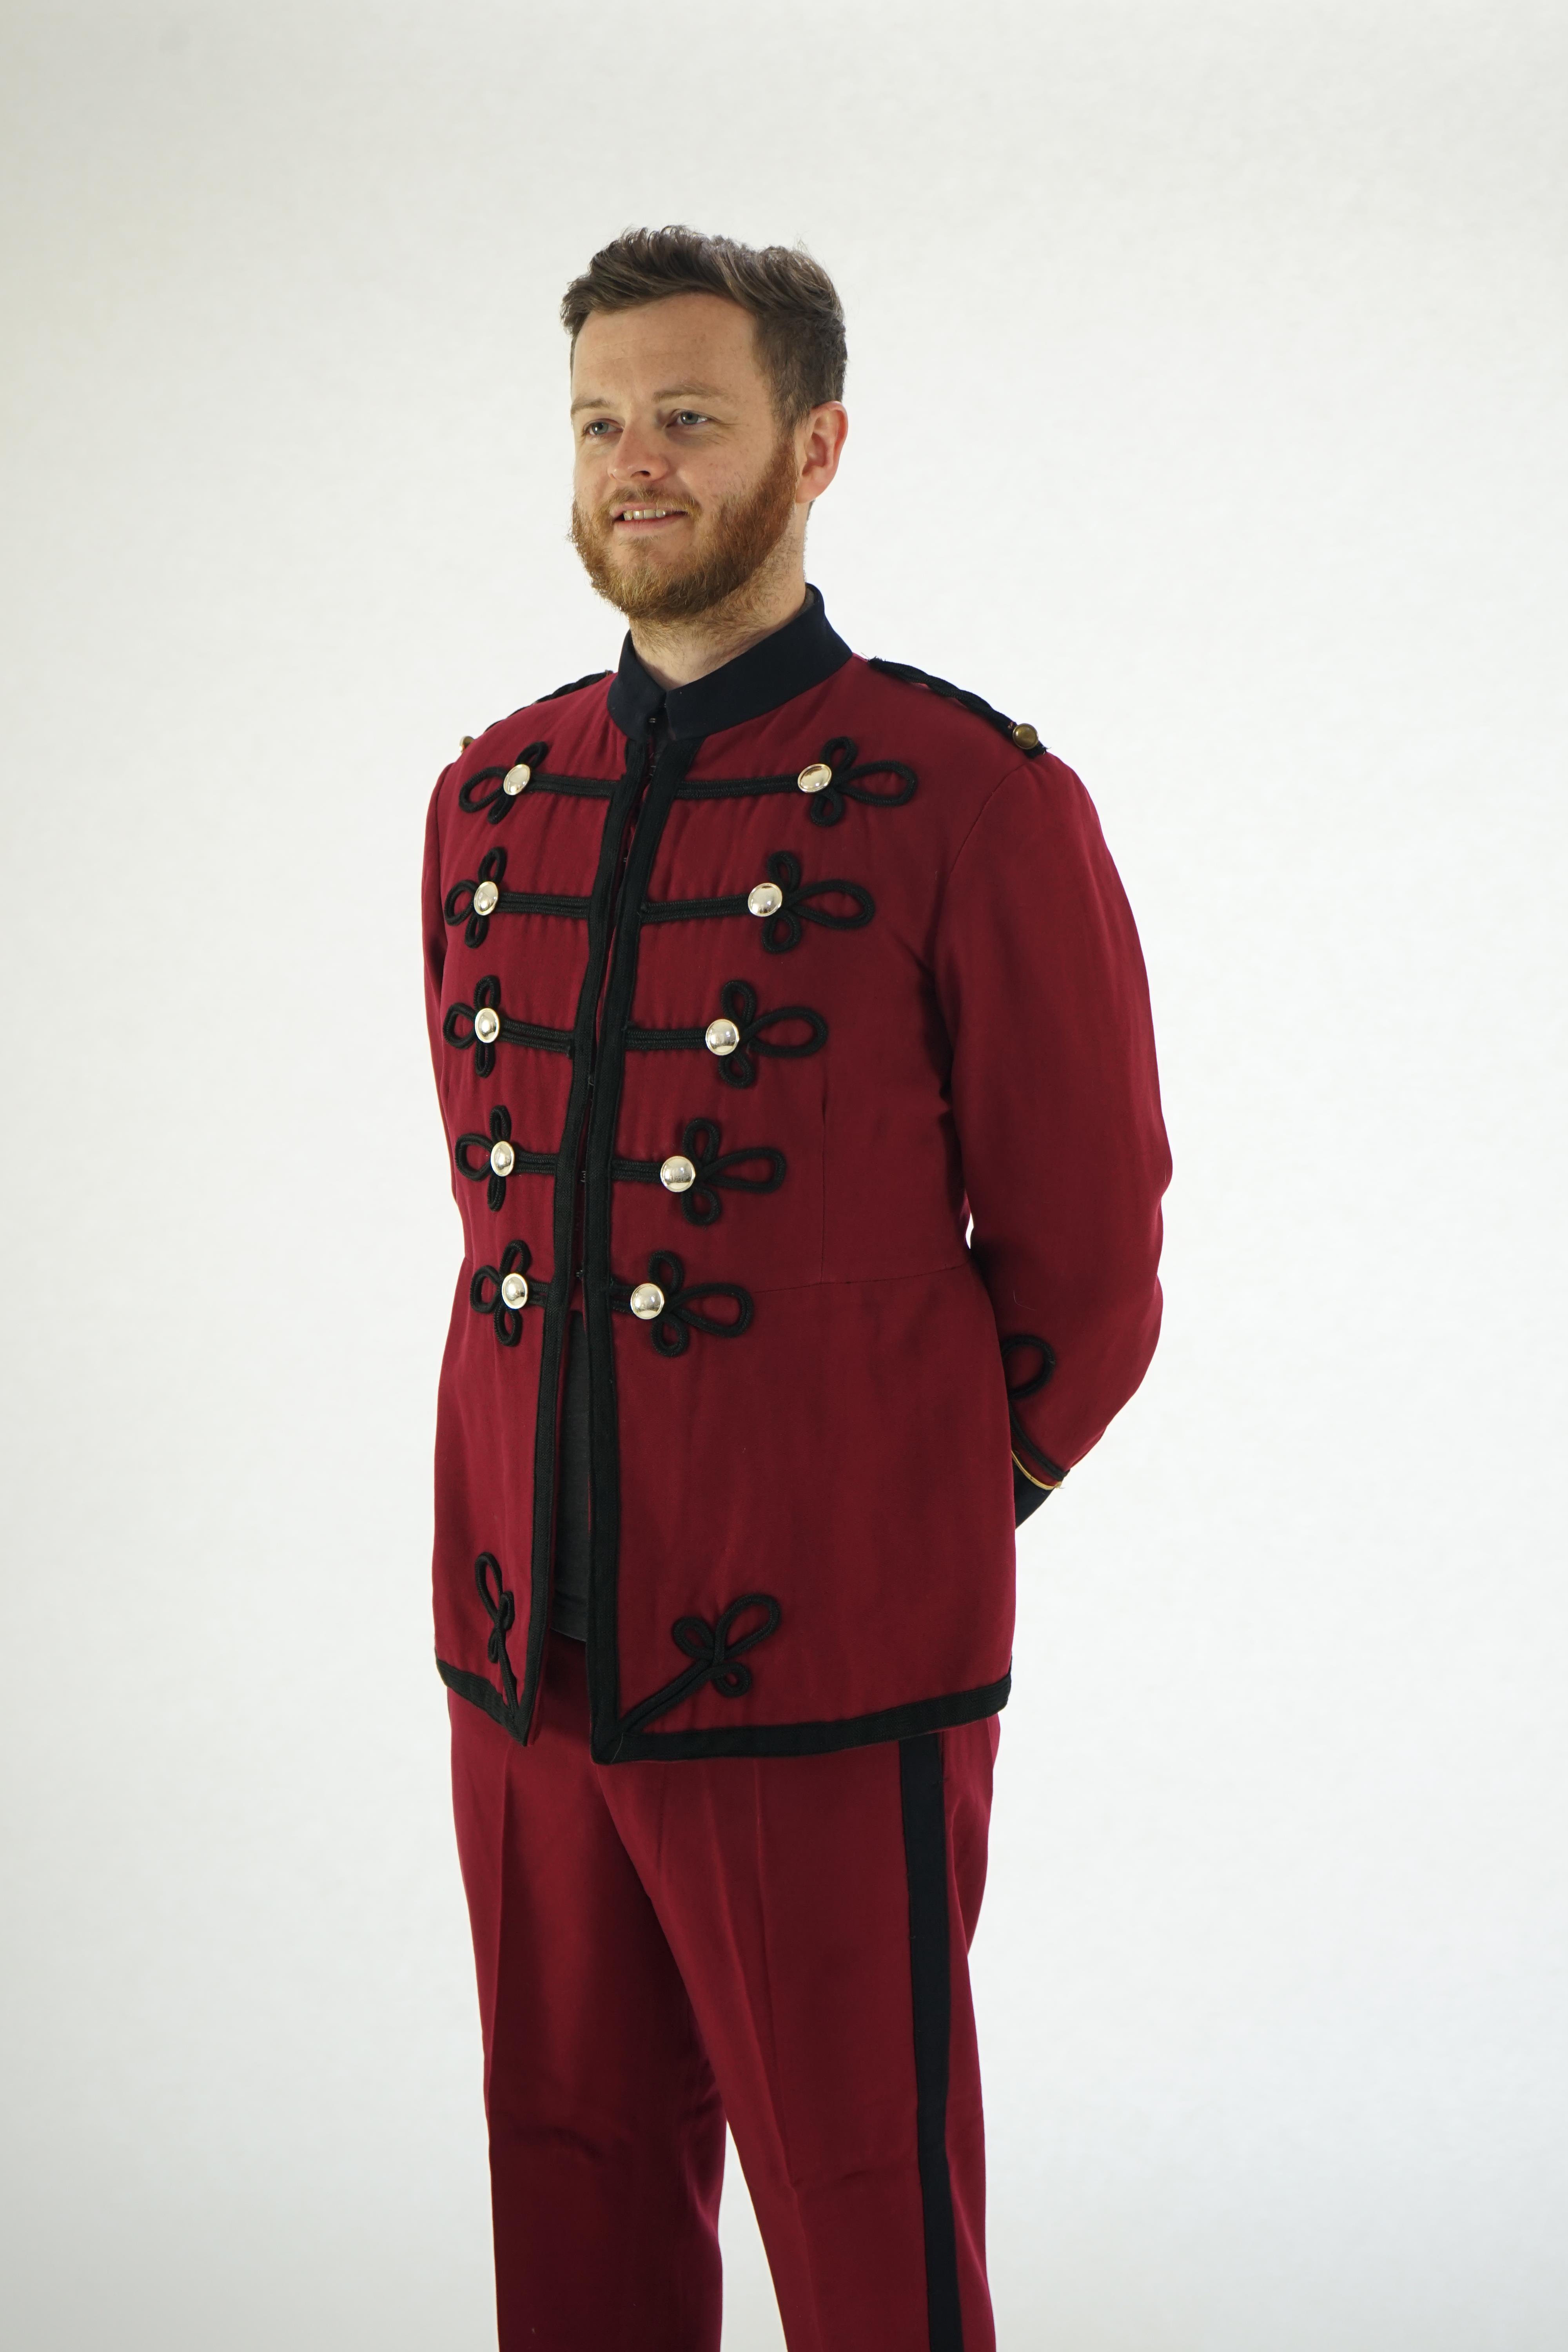 An early 20th century burgundy and black trim Military/Bandsman's uniform jacket and trousers.